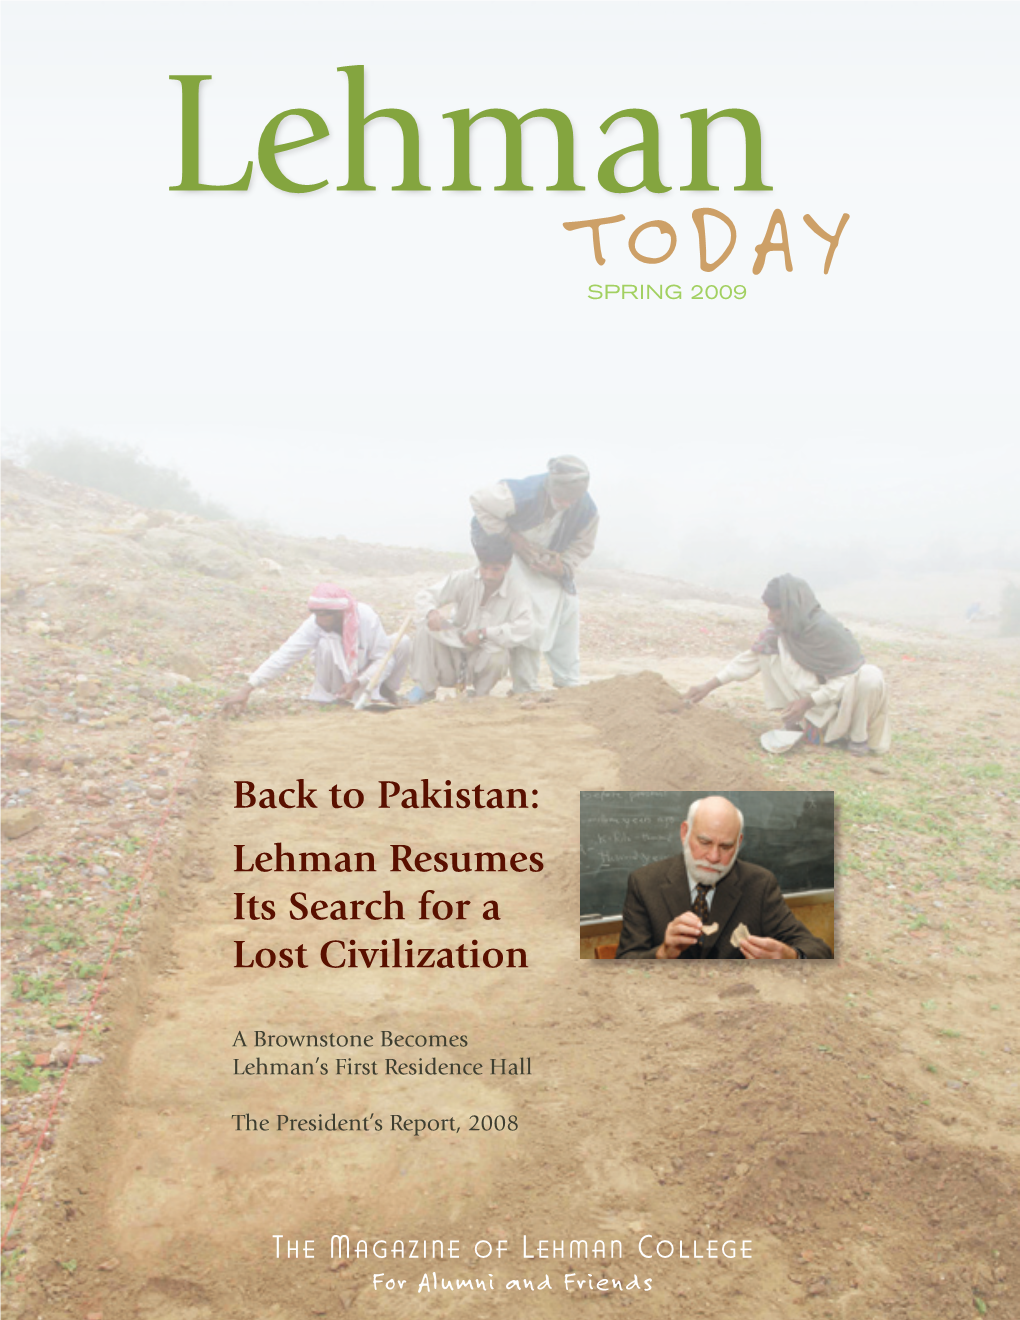 Lehman Resumes Its Search for a Lost Civilization